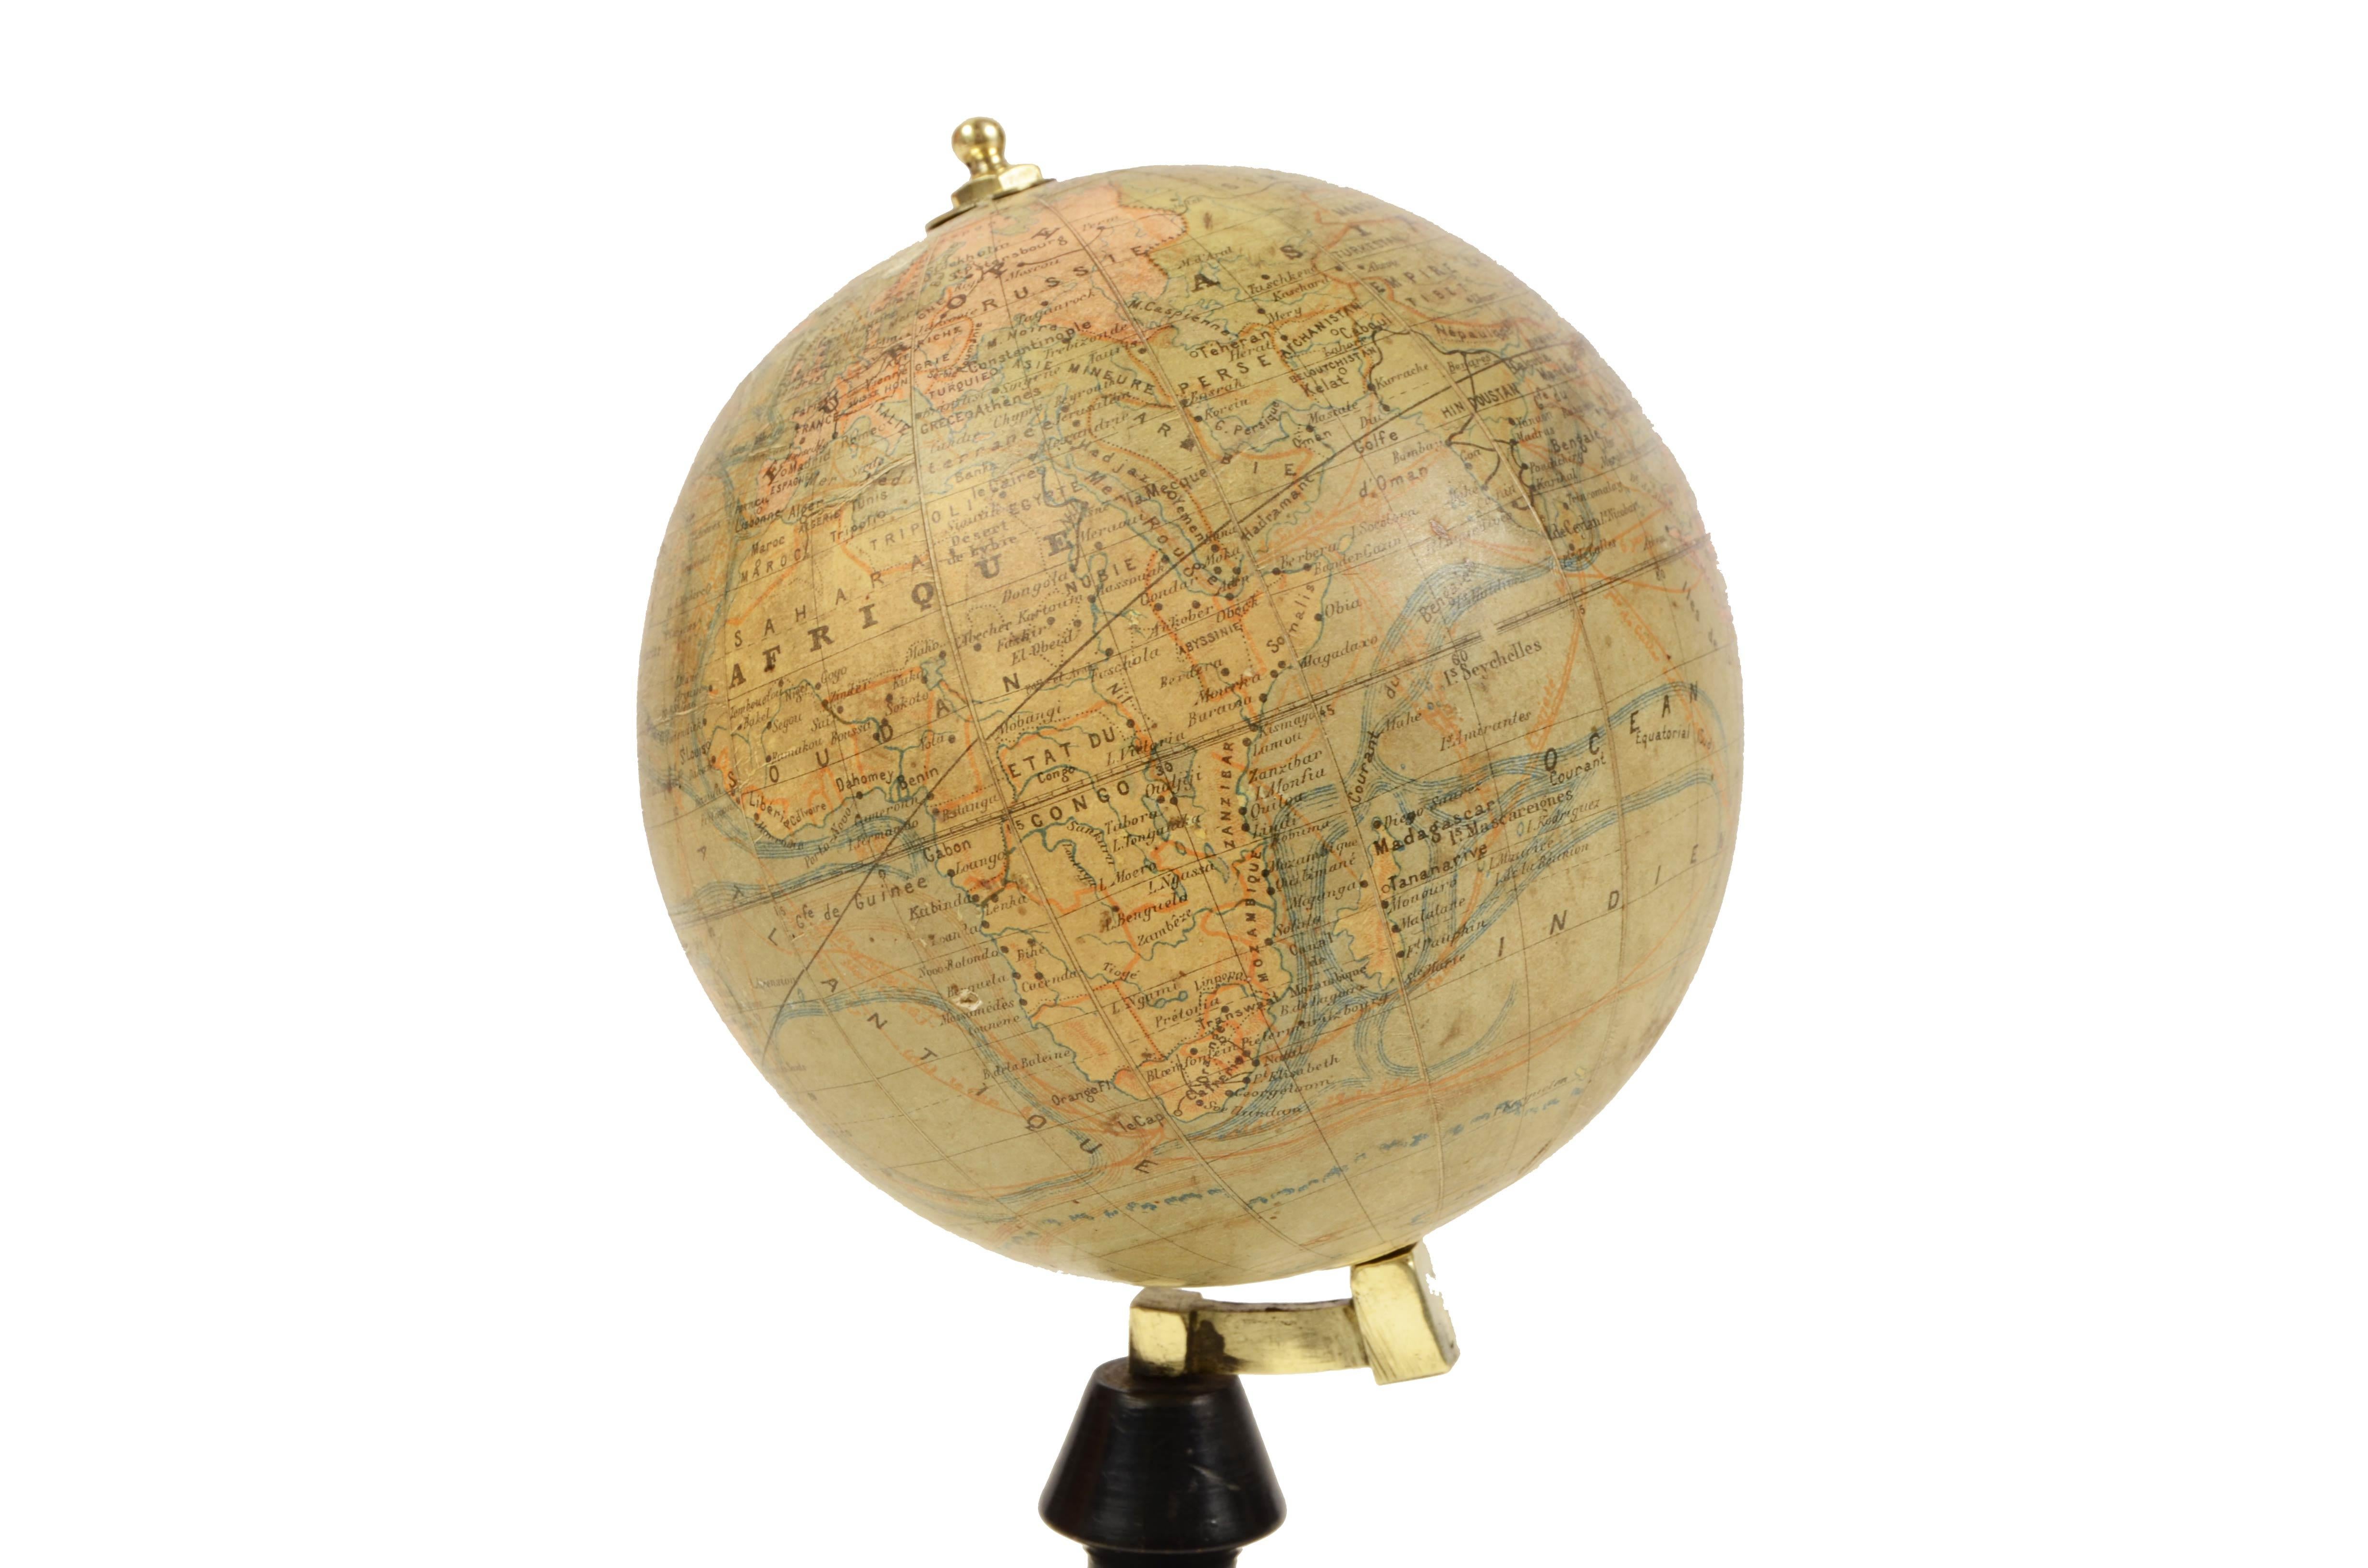 Small terrestrial published in the early 1870s by the French geographer J. Forest; there are territorial maps, ocean currents and the major trade routes of that period. 
Papier maché and plaster sphere covered by paper printed by an engraved copper